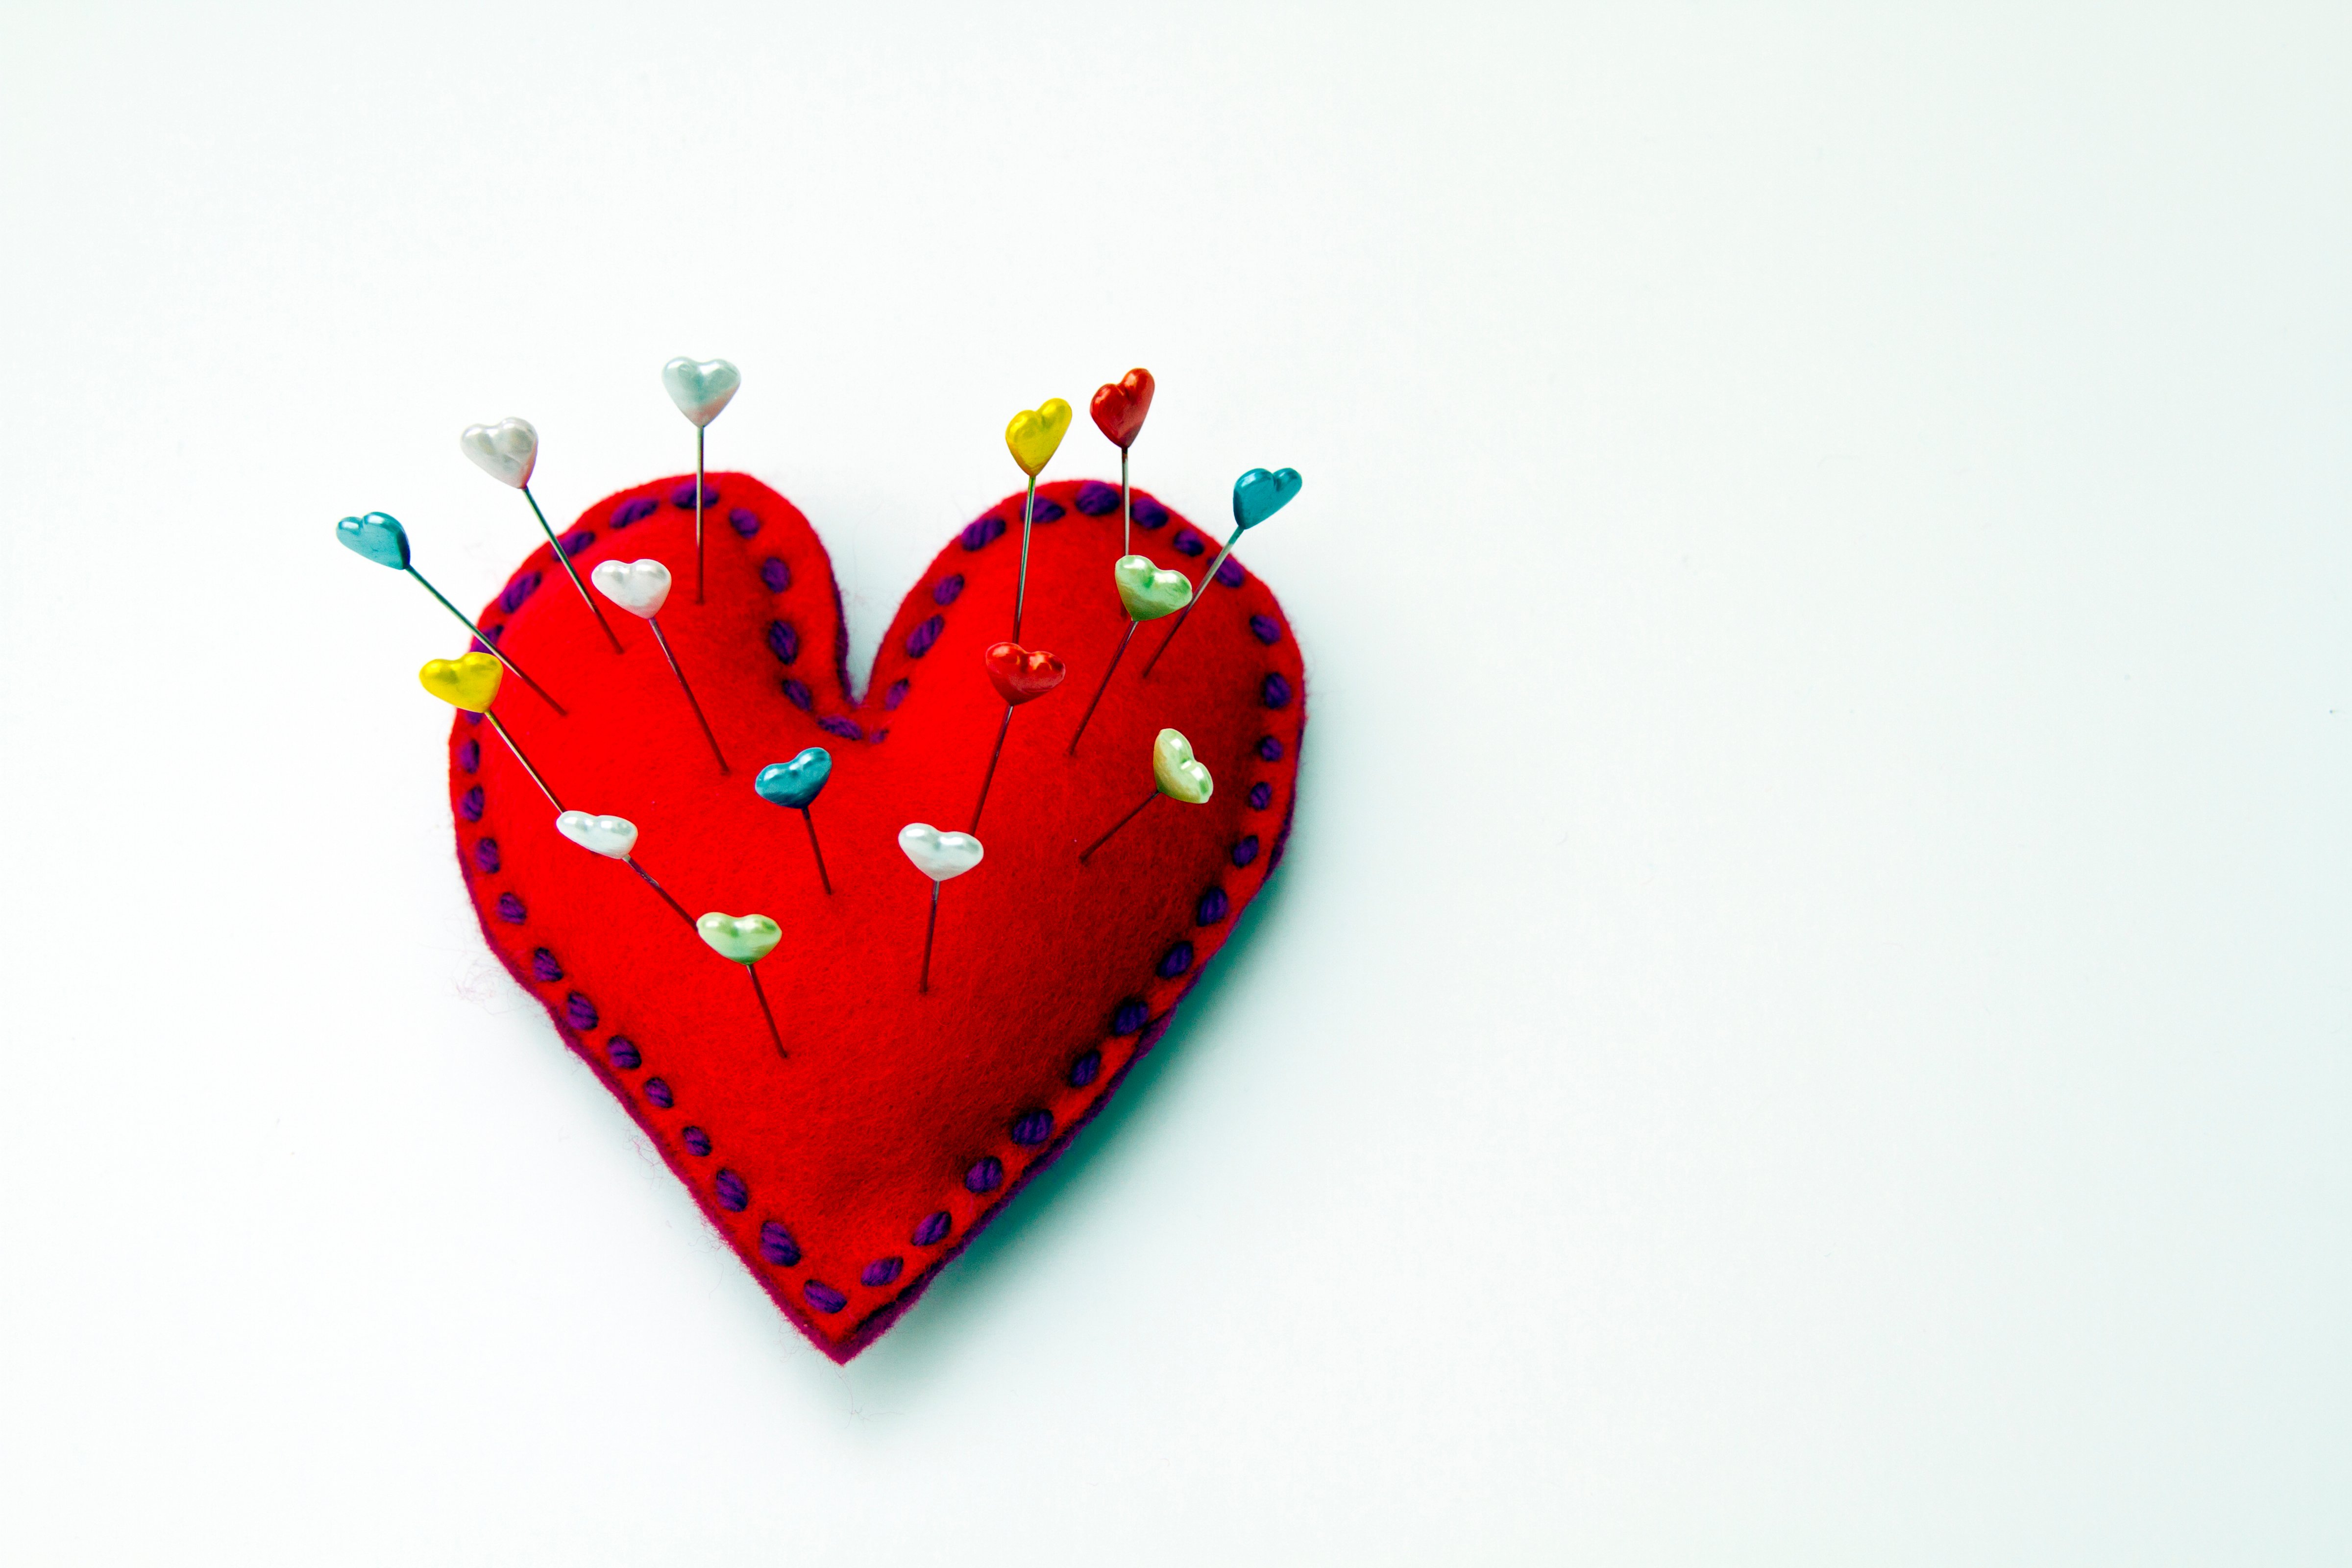 Red felt heart shaped pin cushion with heart topped pins inserted. (Catherine MacBride—Getty Images)